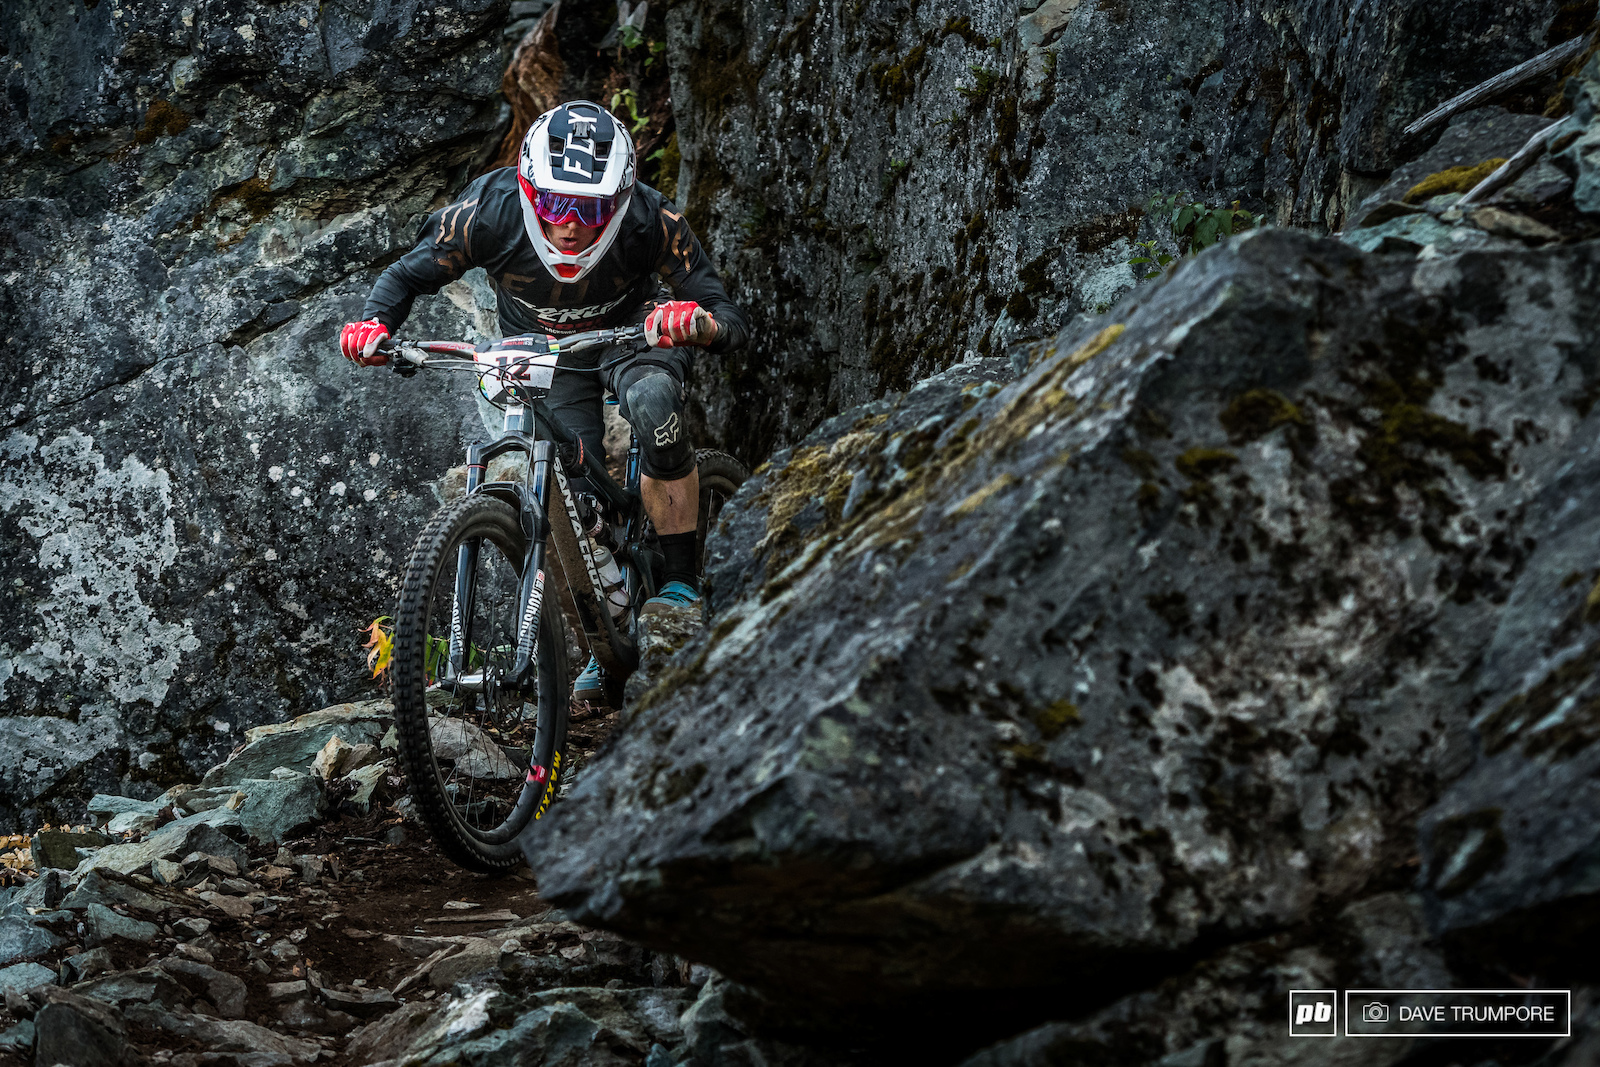 Smashing rocks and riding to his true potential Mark Scott finally landed himself a long overdue podium today.